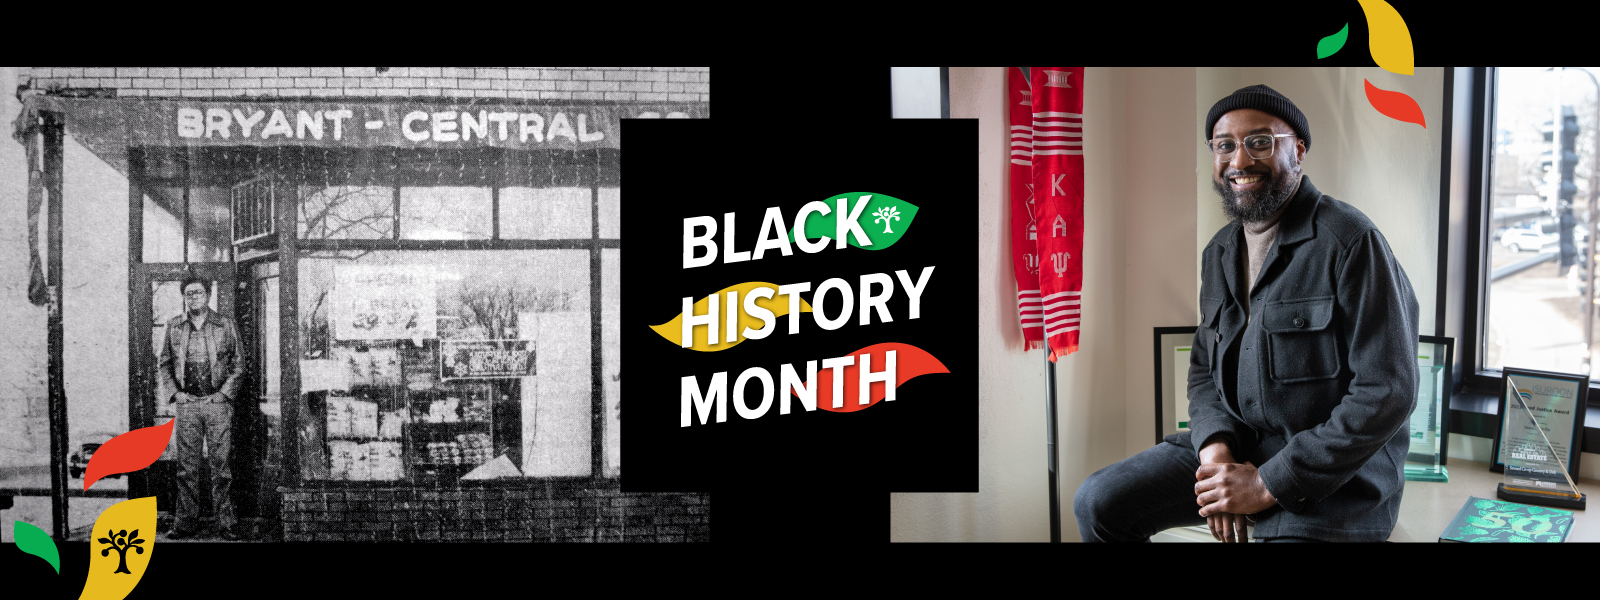 A graphic with a historical photo of Moe Burton on one side and a present-day photo of Ray Williams on the other side, with the text "Black History Month" in the middle